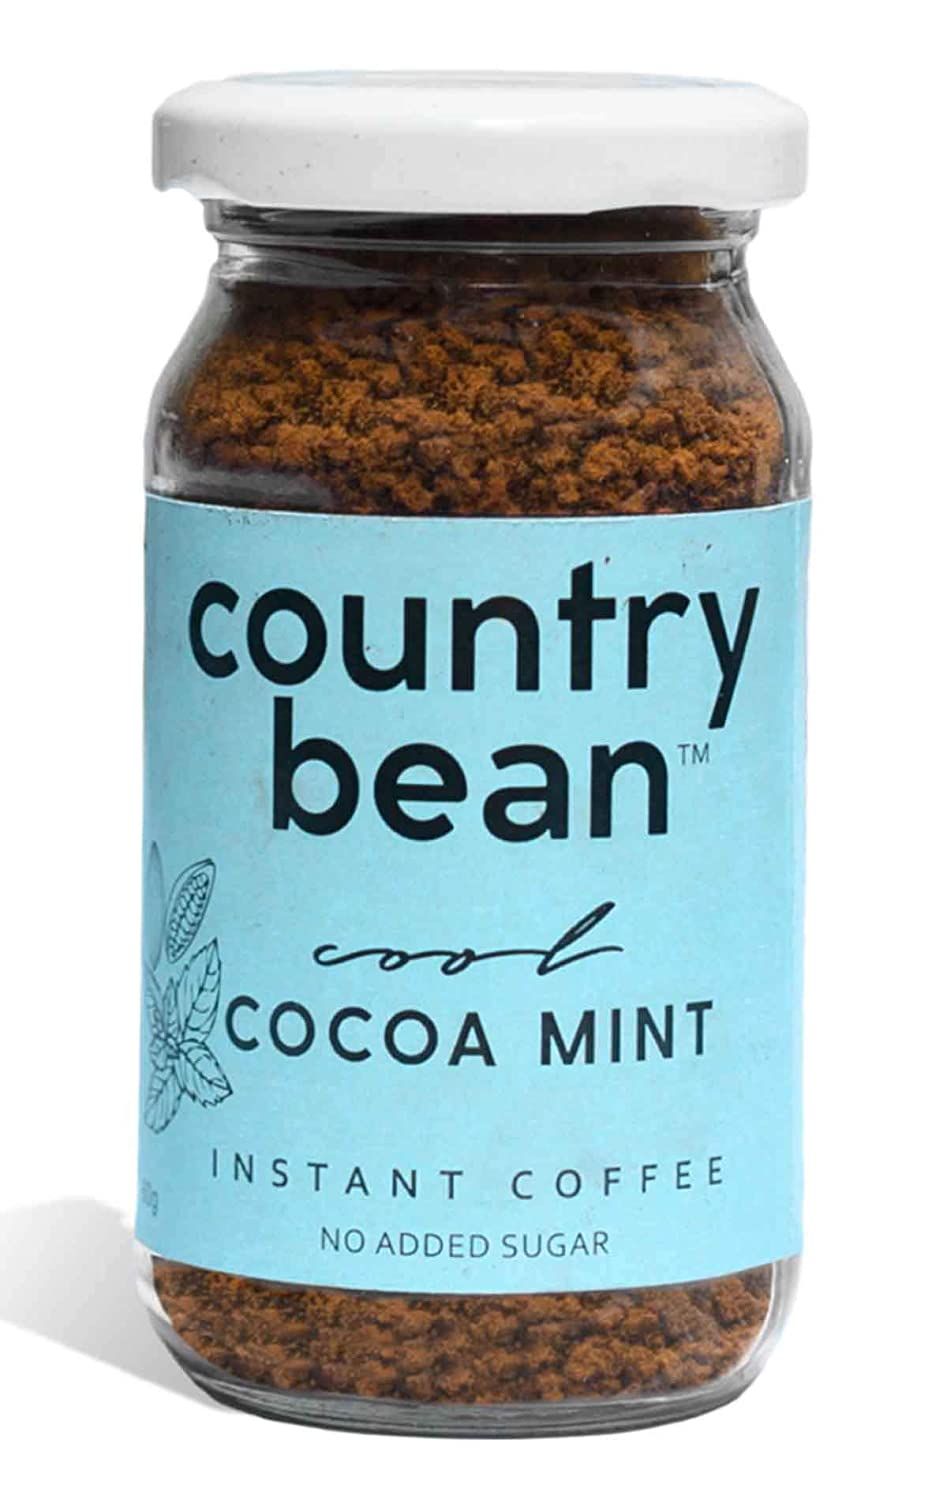 Country Bean Mint Coffee Powder Image